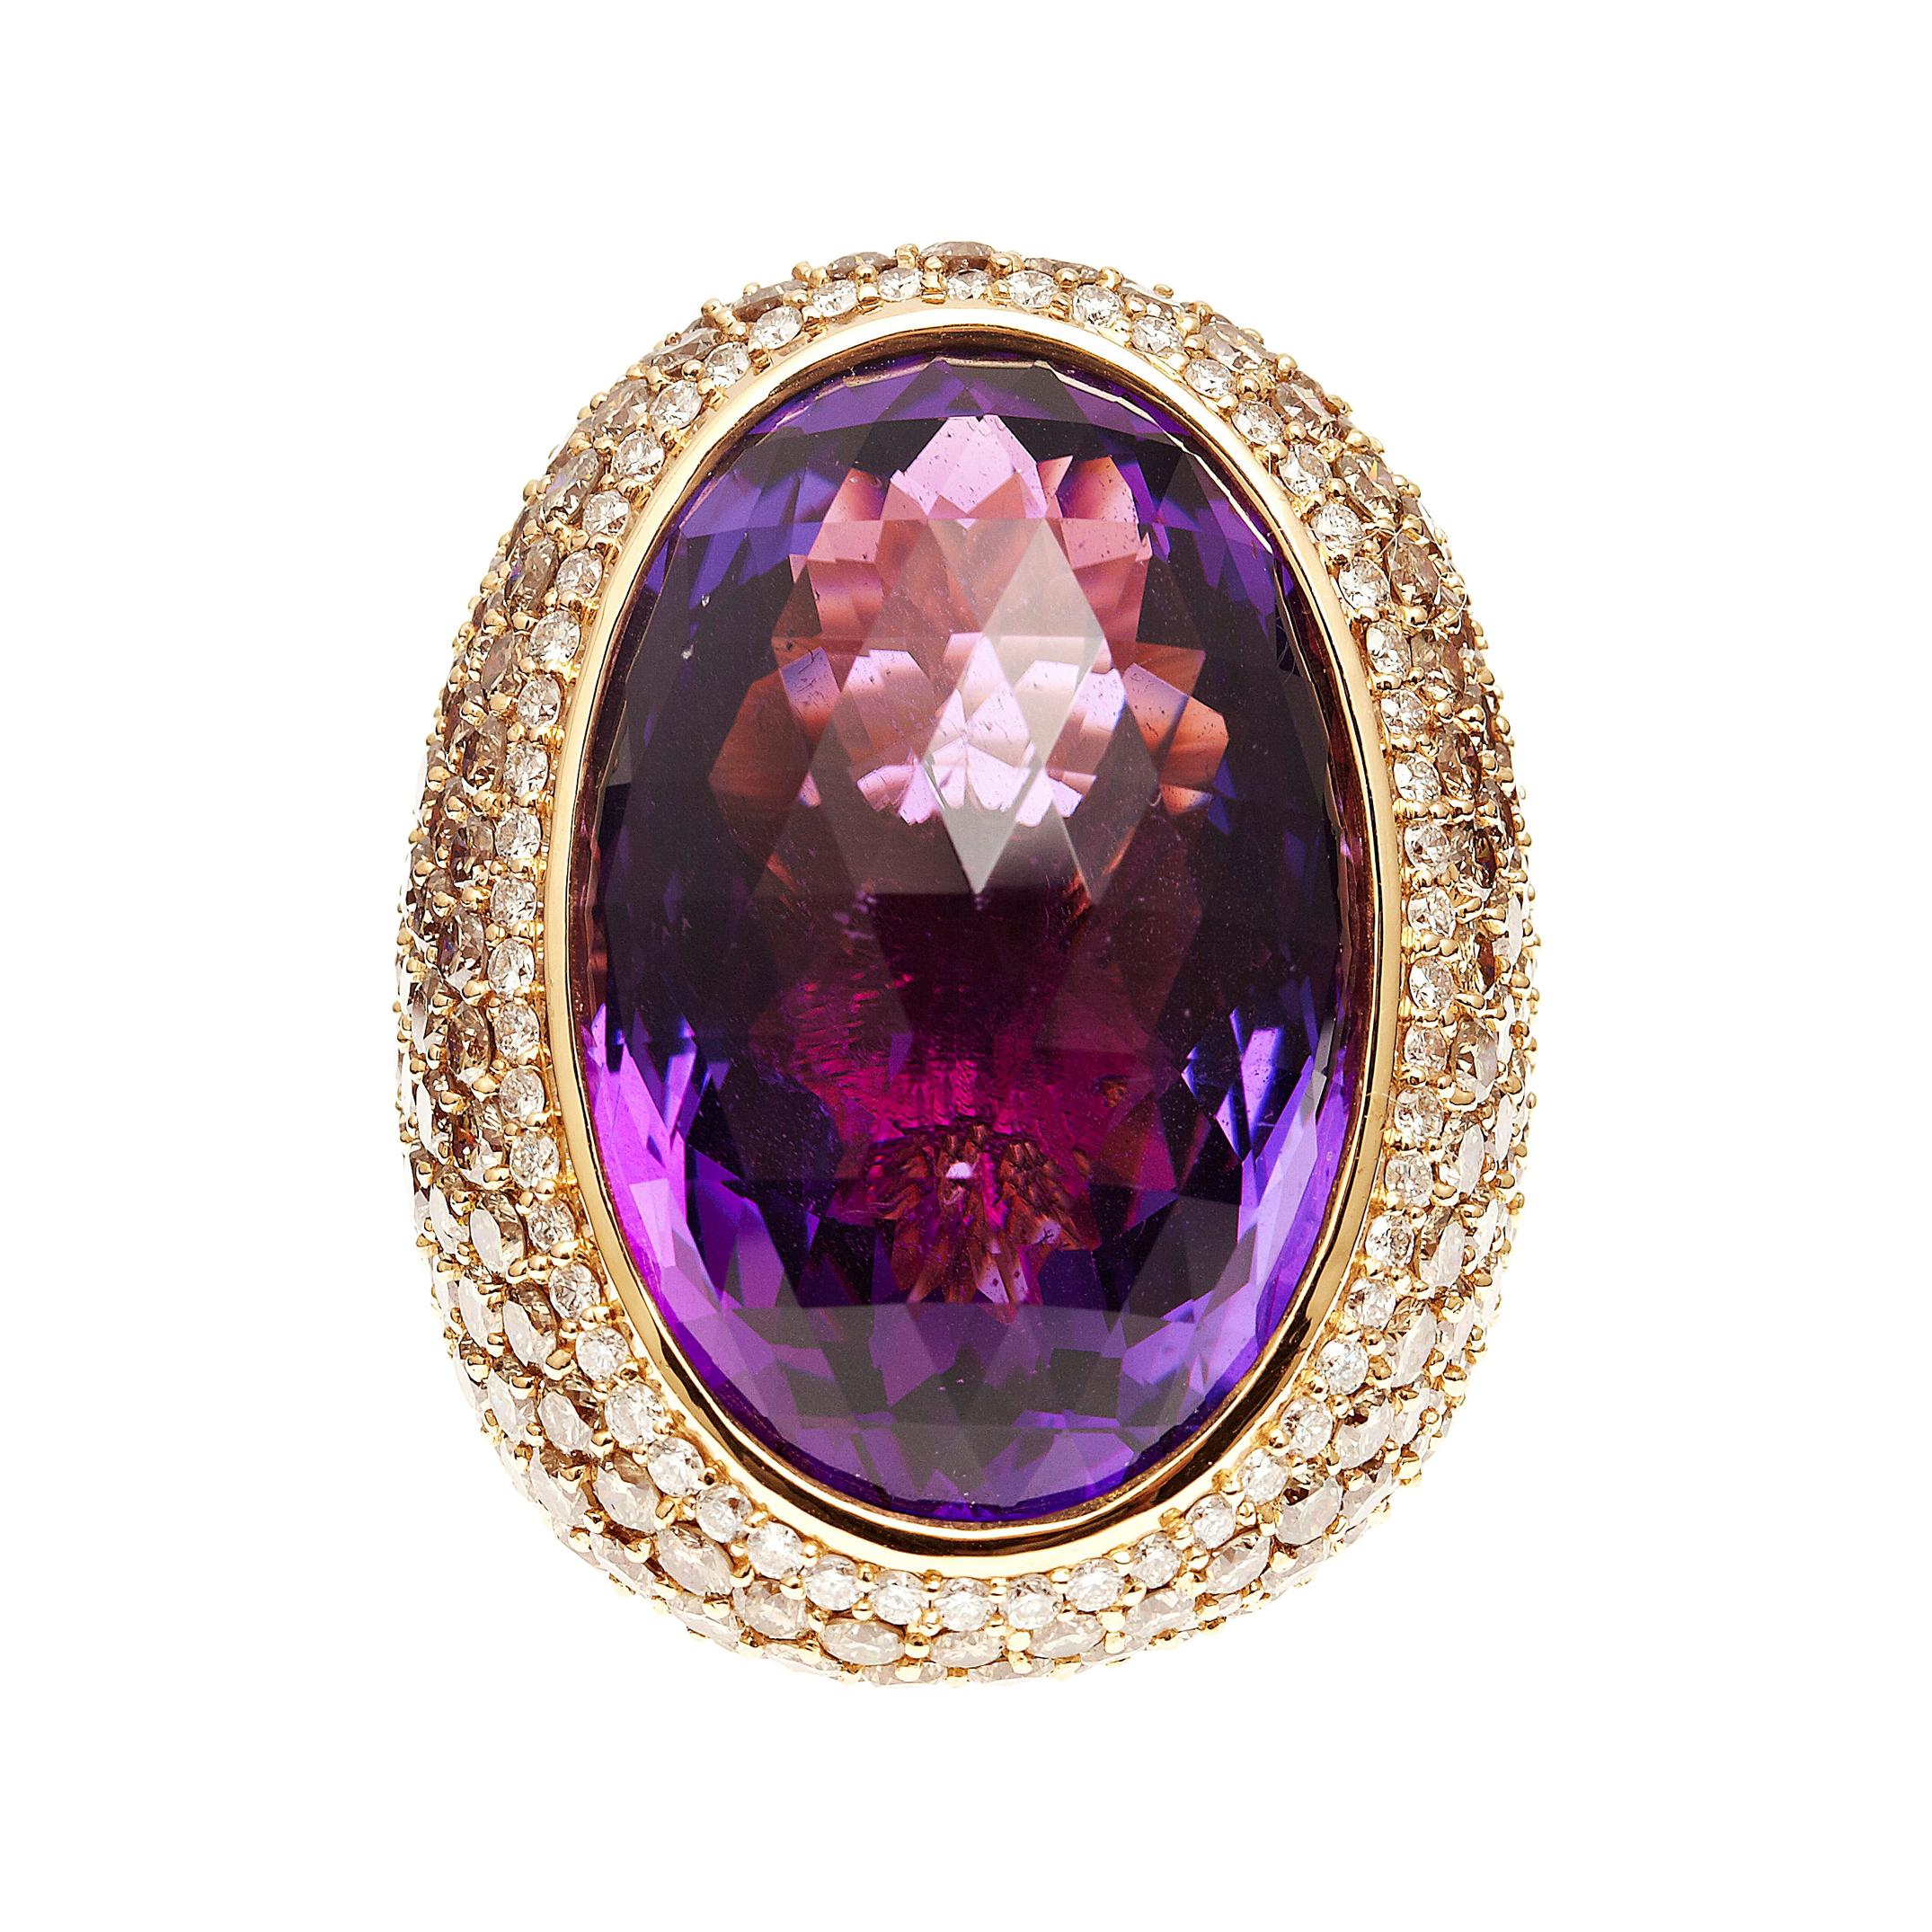 Large Statement Cocktail Ring with 34ct Amethyst Center Stone For Sale